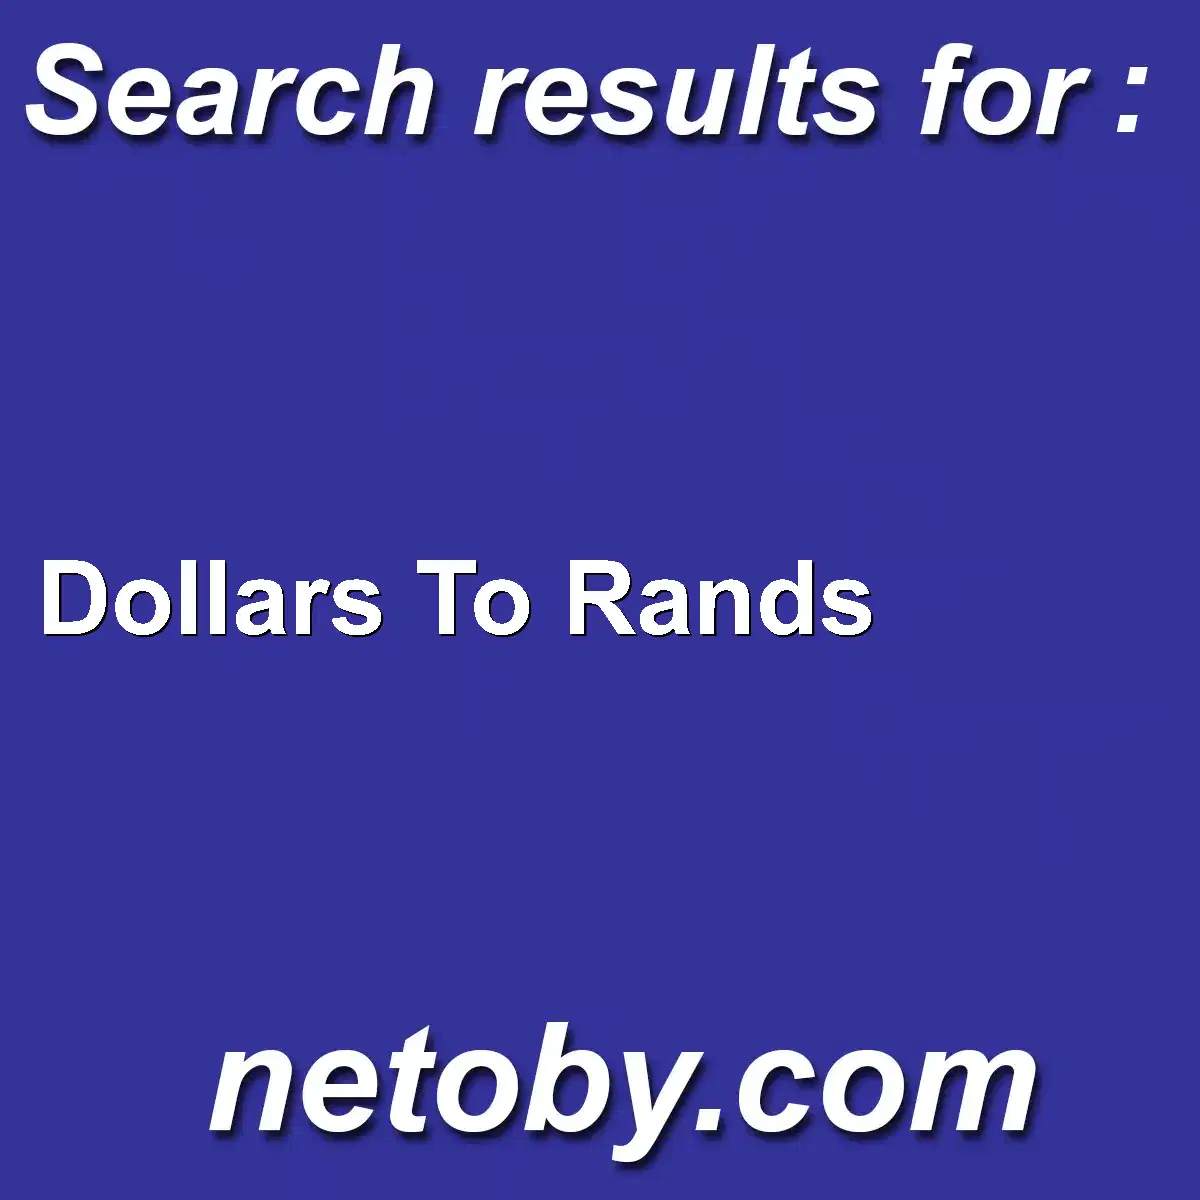 ﻿Dollars To Rands